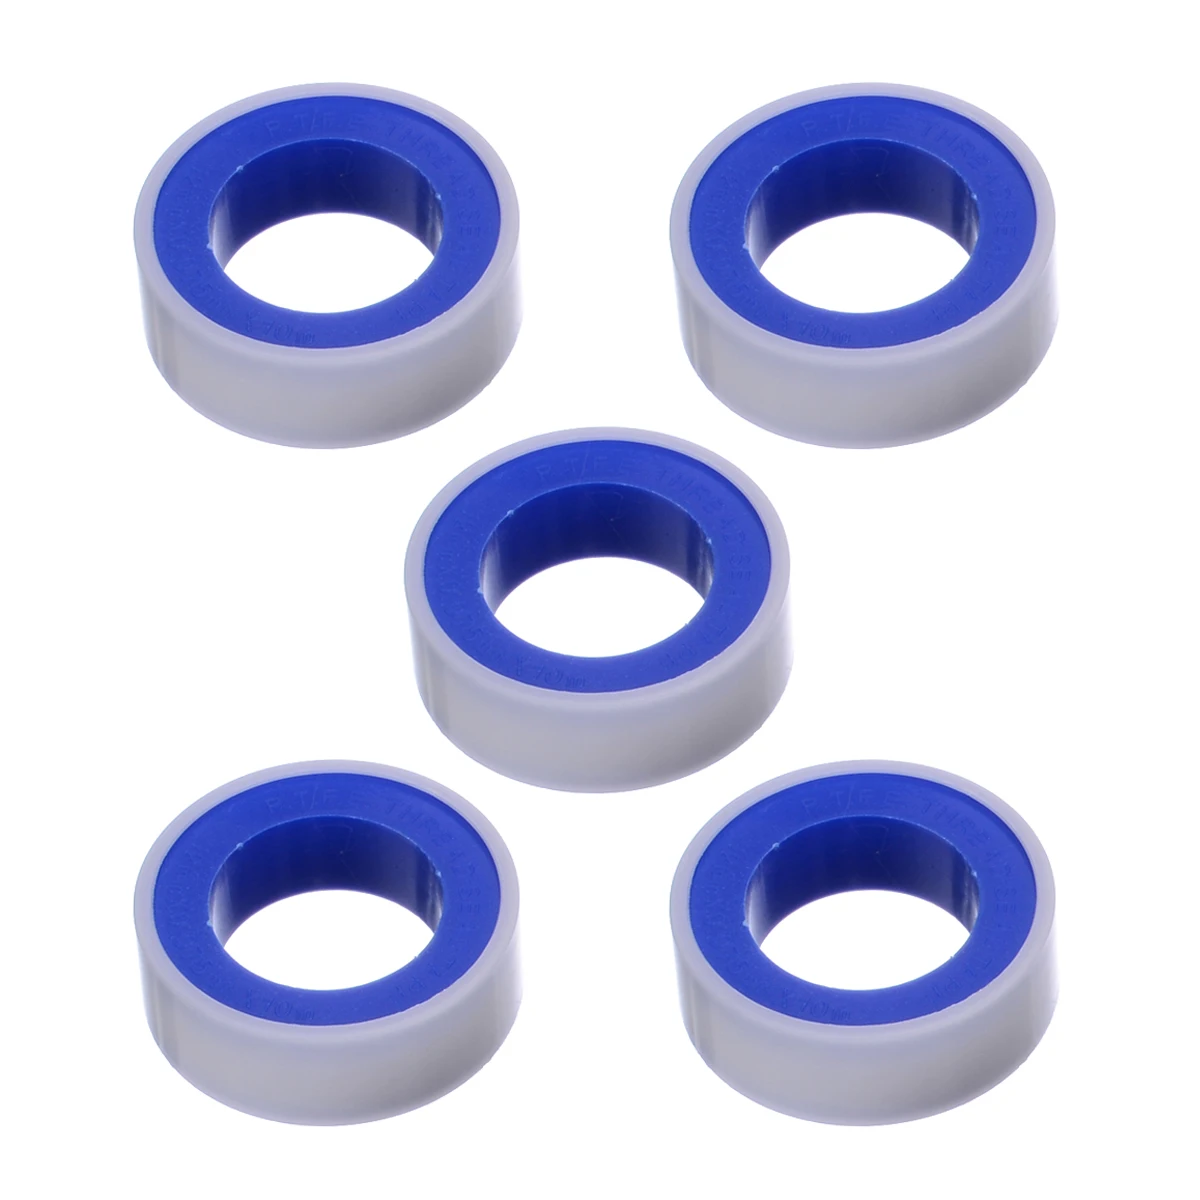 5pcs/set Roll Plumbing Joint Plumber Fitting Thread Seal Tape for Water Pipe Plumbing Sealing Tapes Household